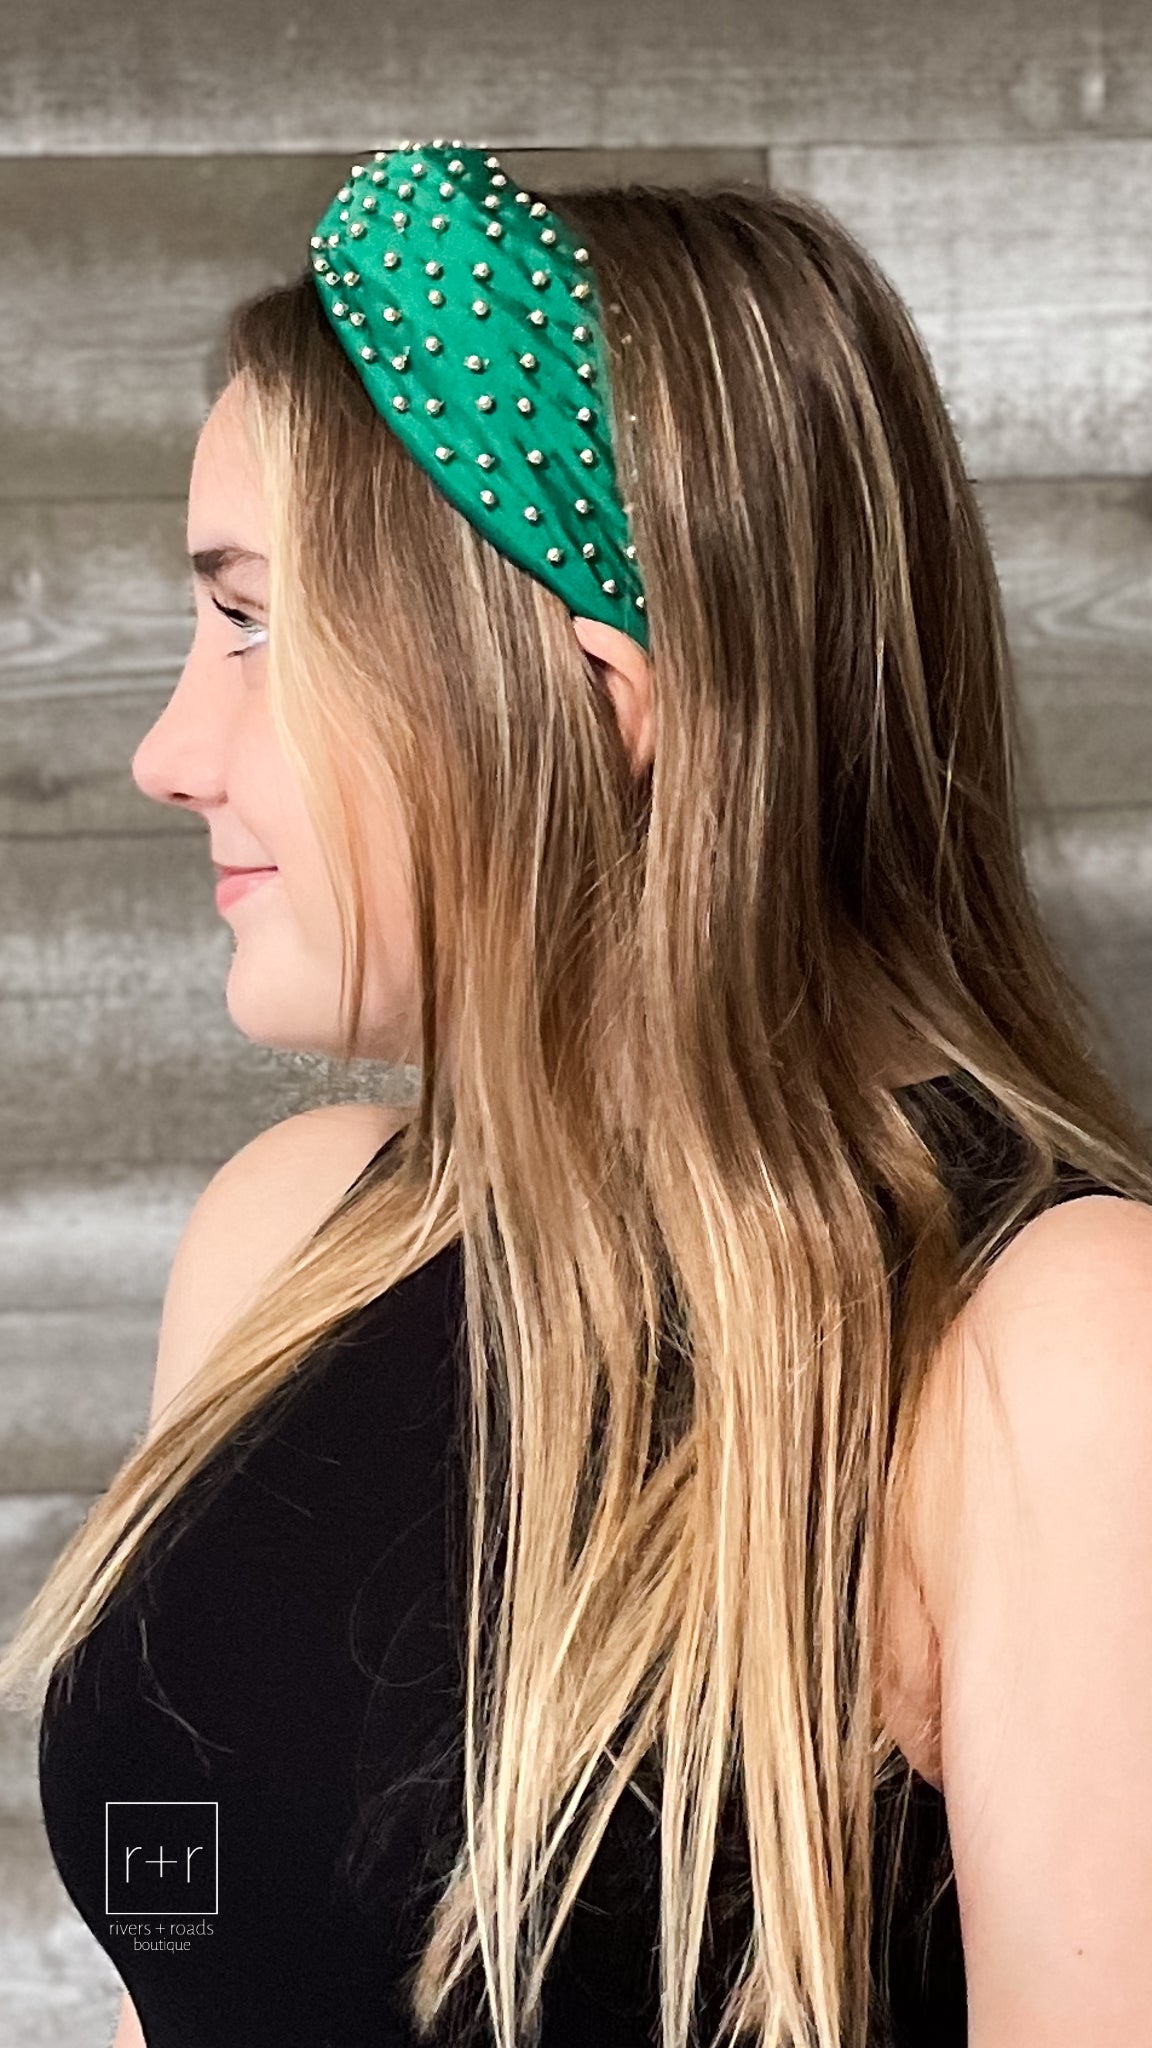 kelly green knotted fashion headband with gold ball studs